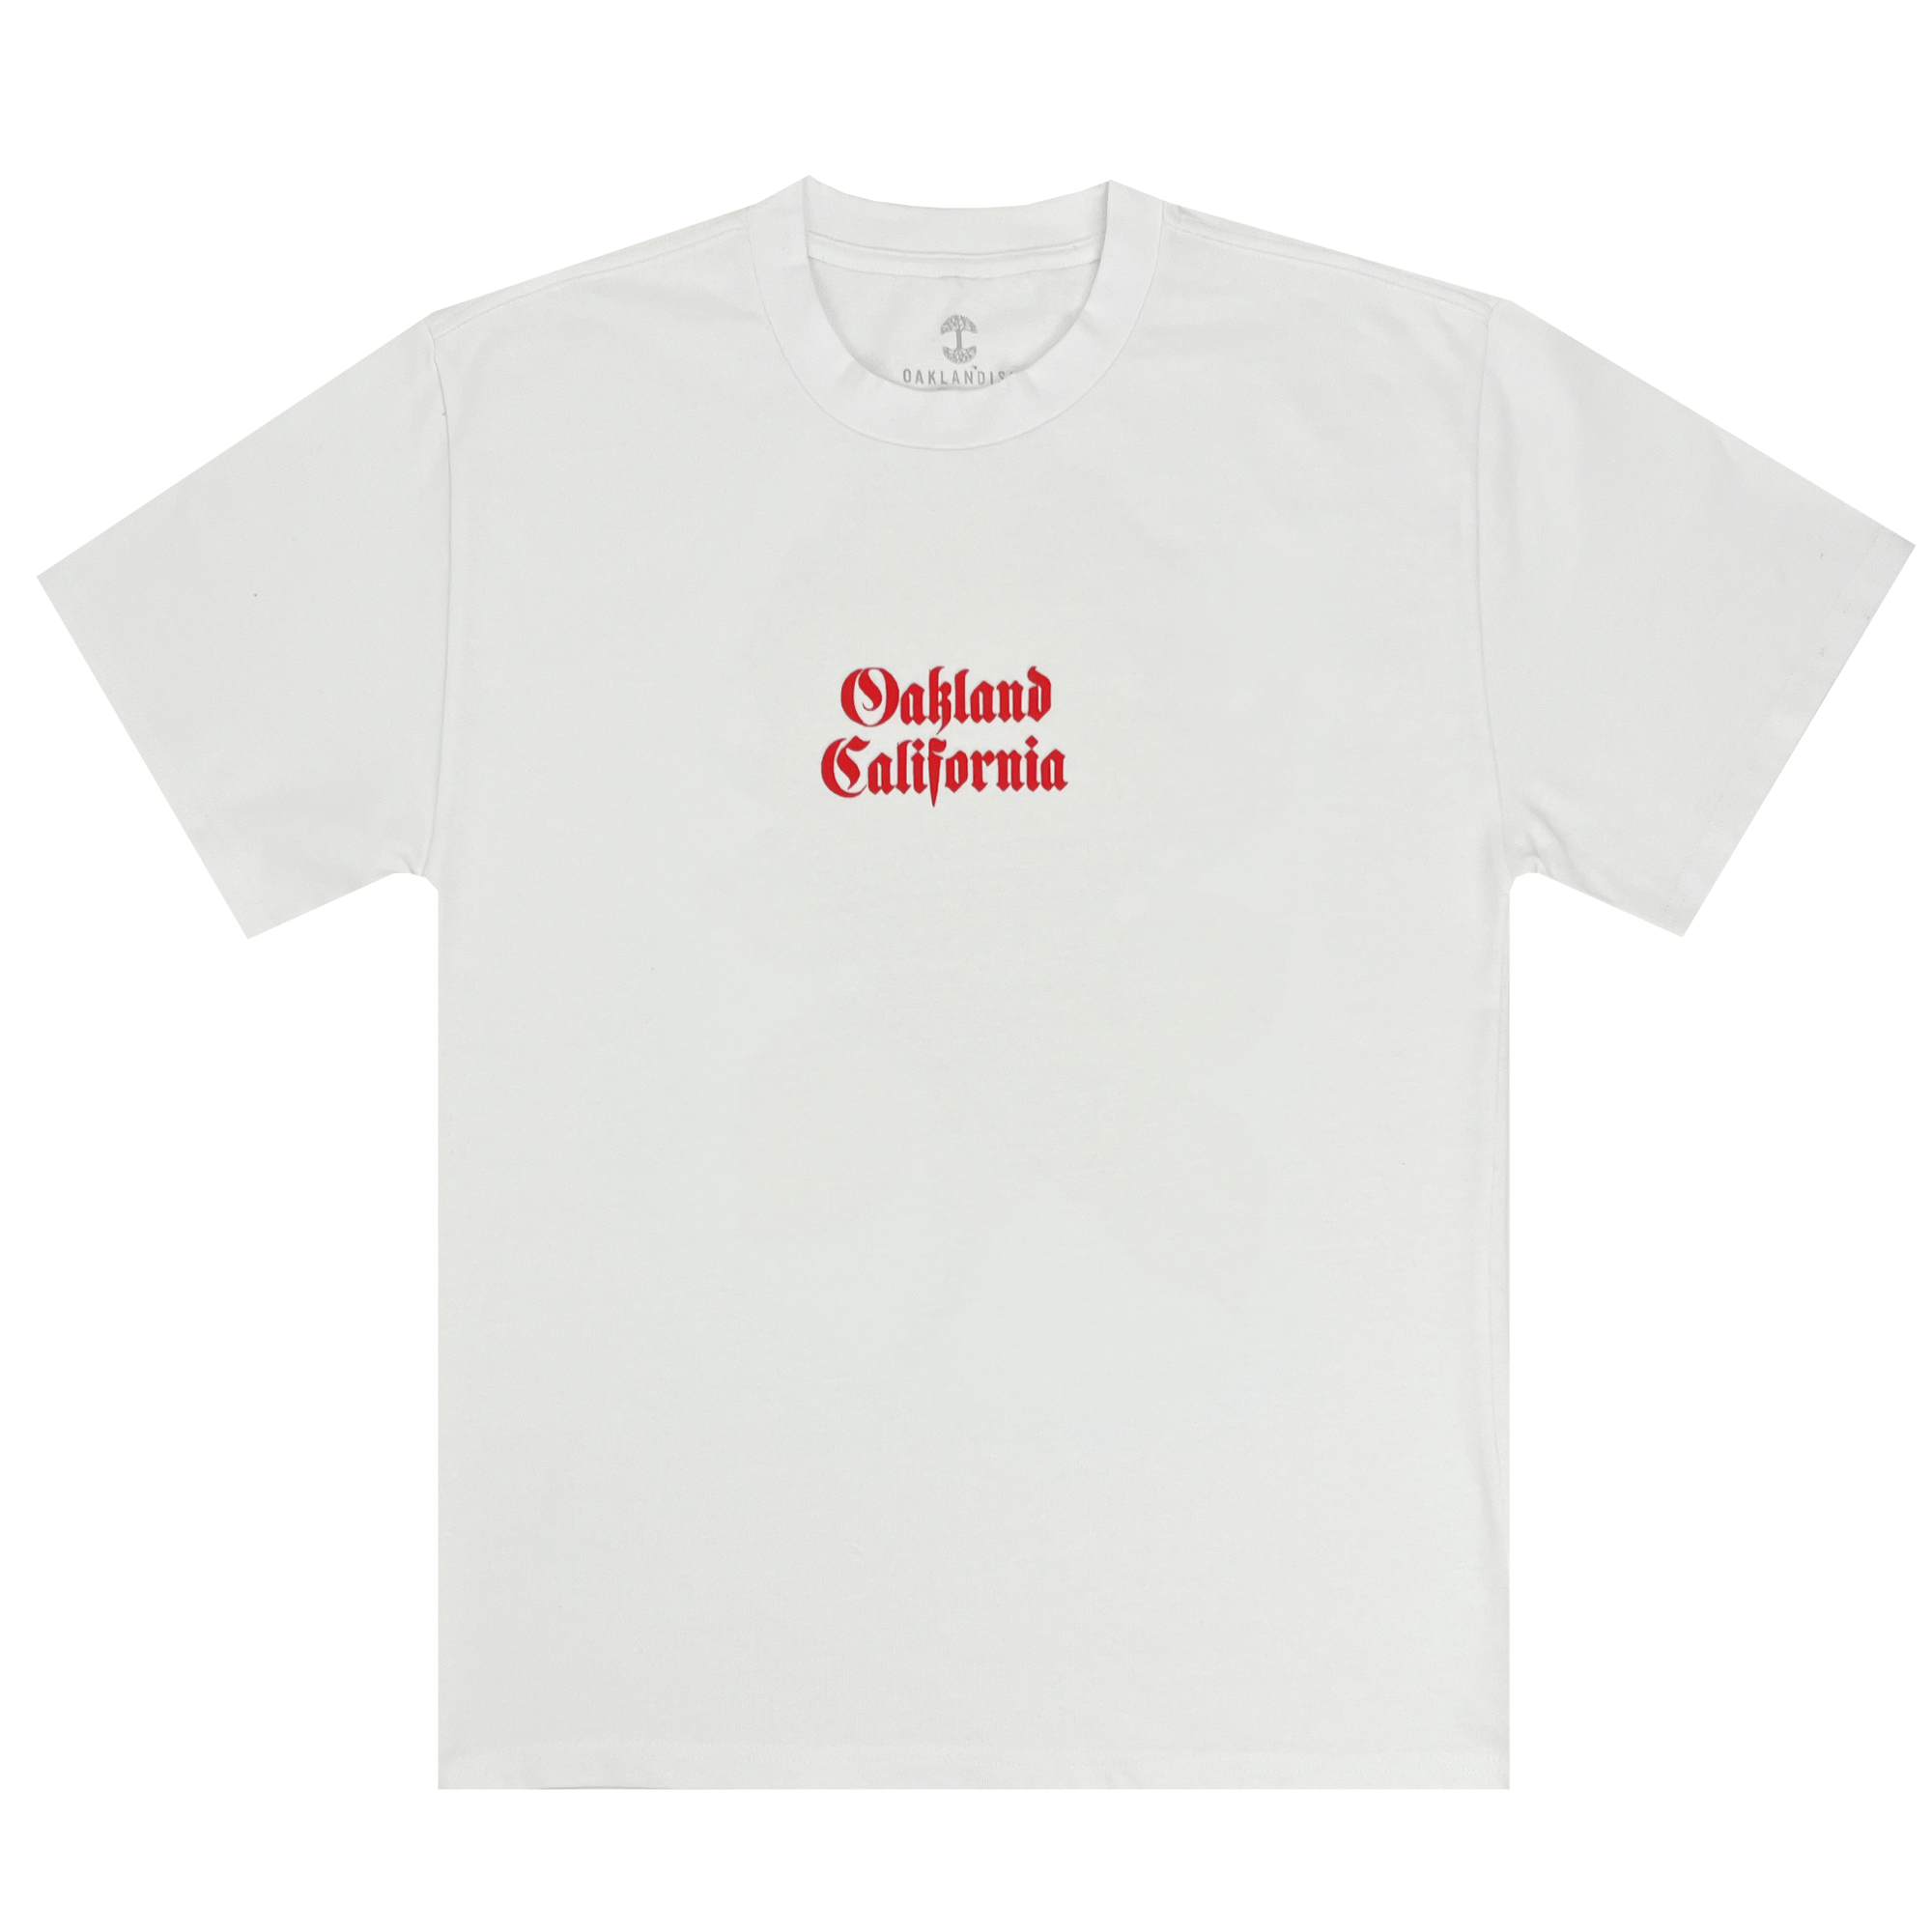 Front view of white tee with Oakland California printed centered in red ink.